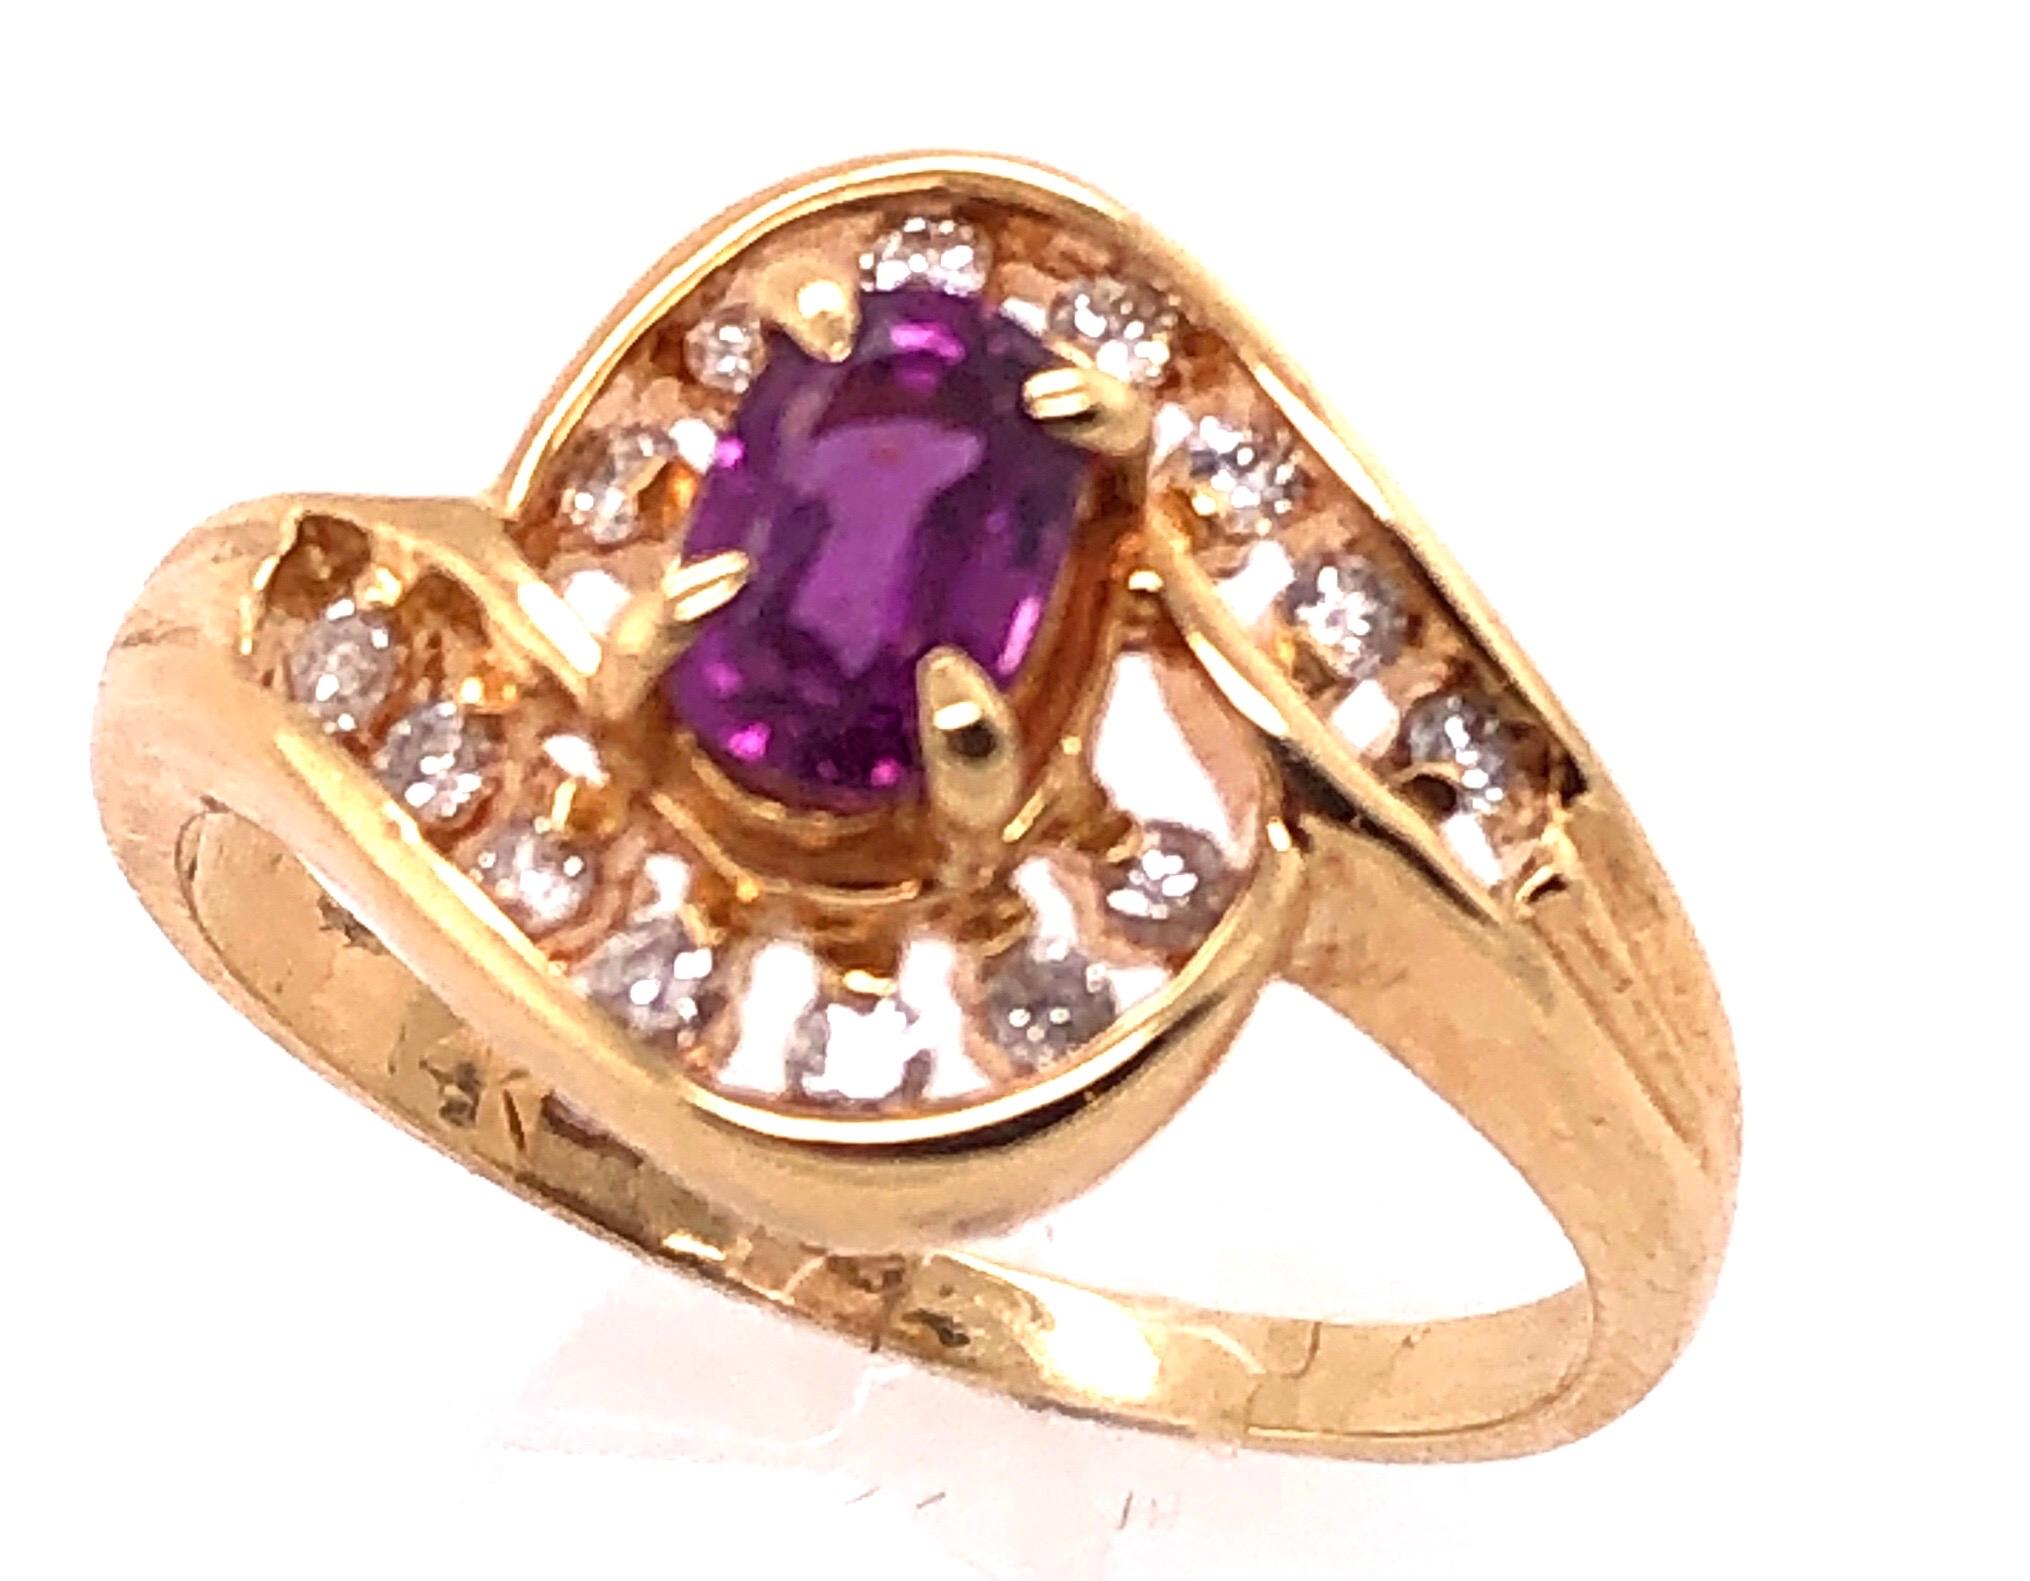 14 Karat Yellow Gold Purple Peridot Ring with Round Diamond Accents 
0.14 TDW.
Size 7.5
3.48 grams total weight.